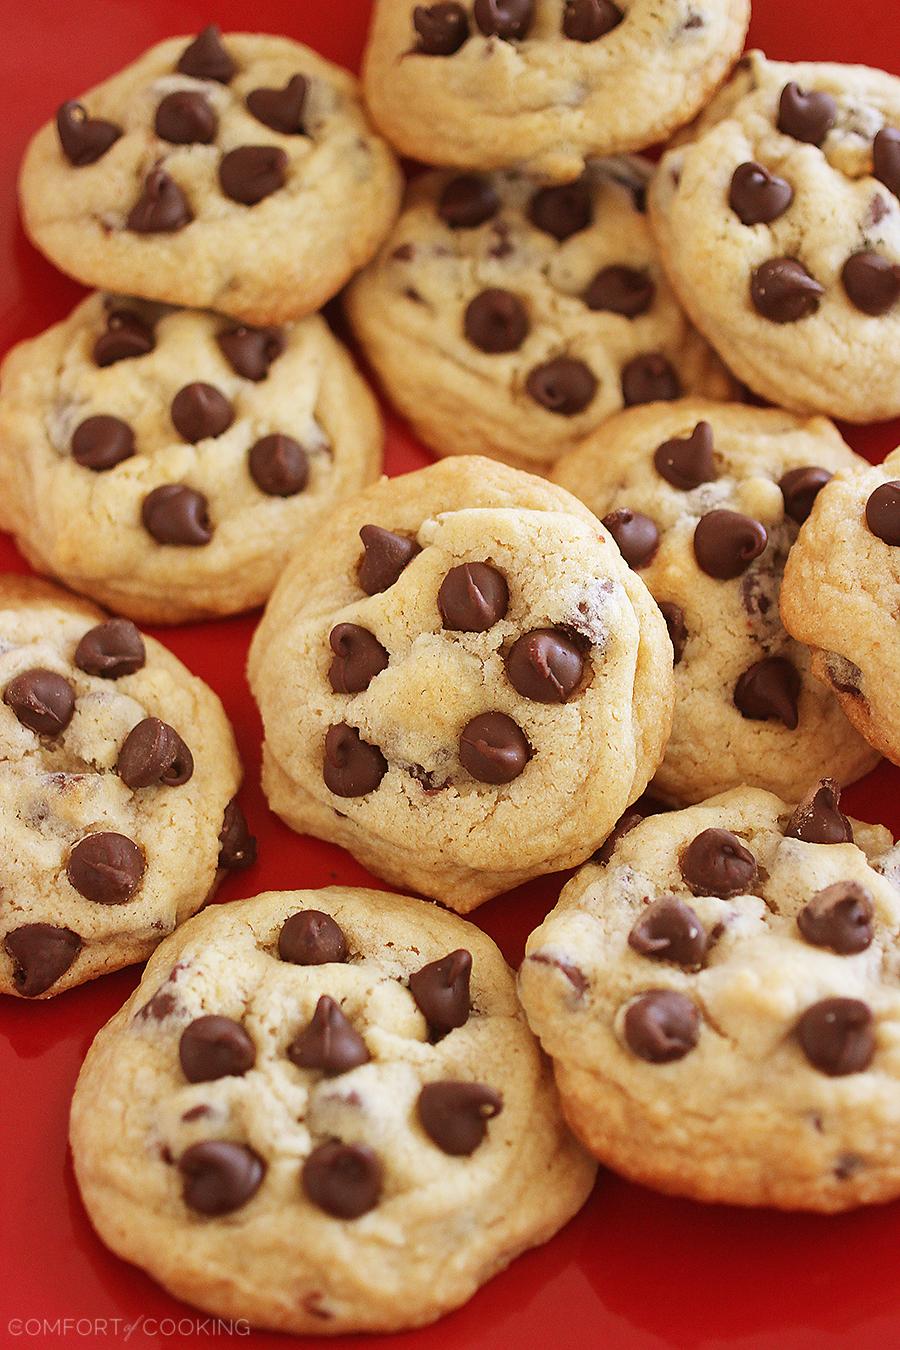 Best chewy chocolate chip cookies recipe